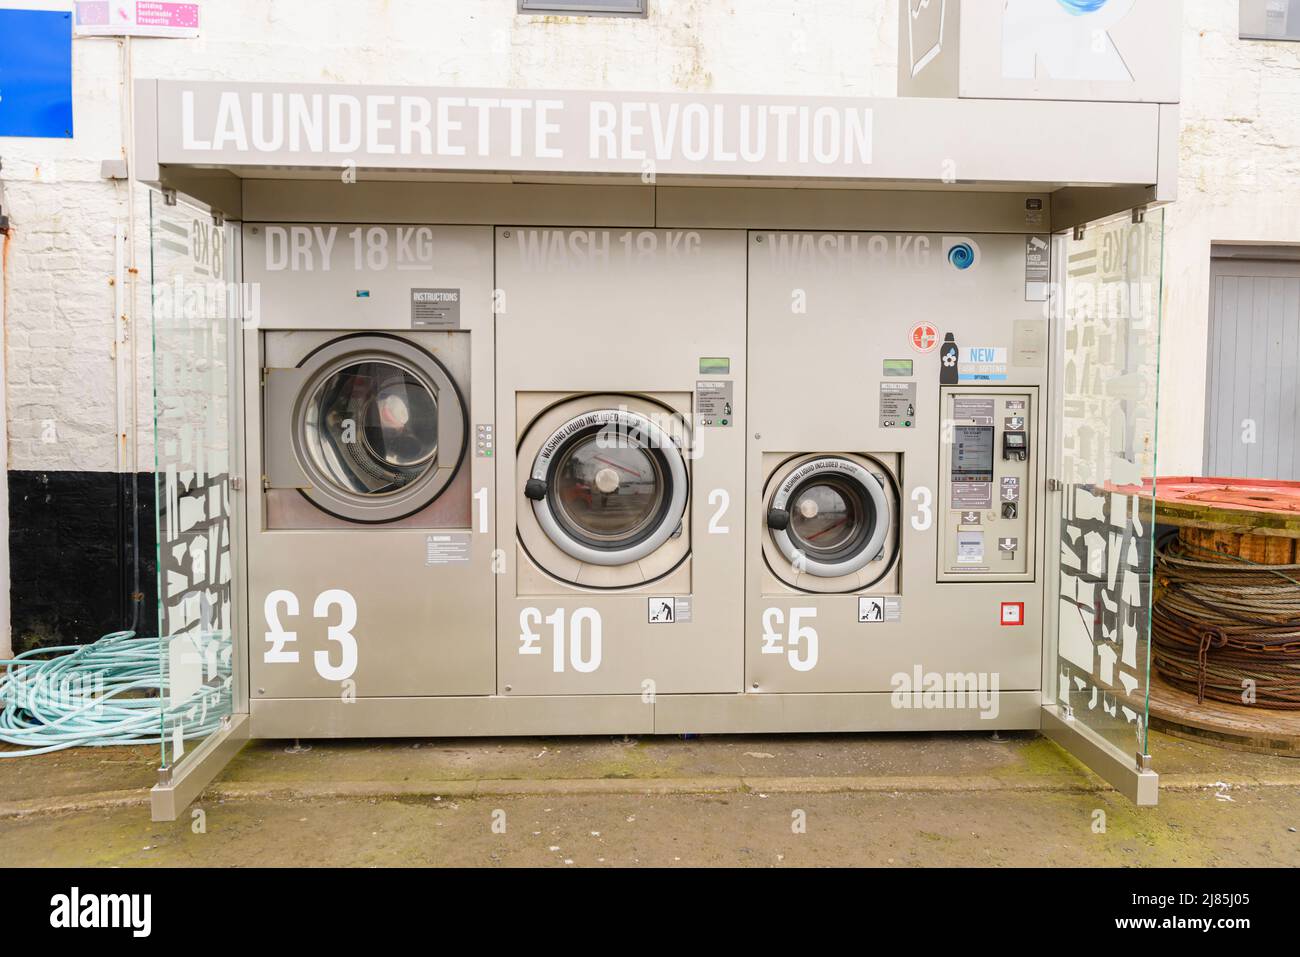 Automated launderette with a tumble drier, large washing machine and small washing machine Stock Photo